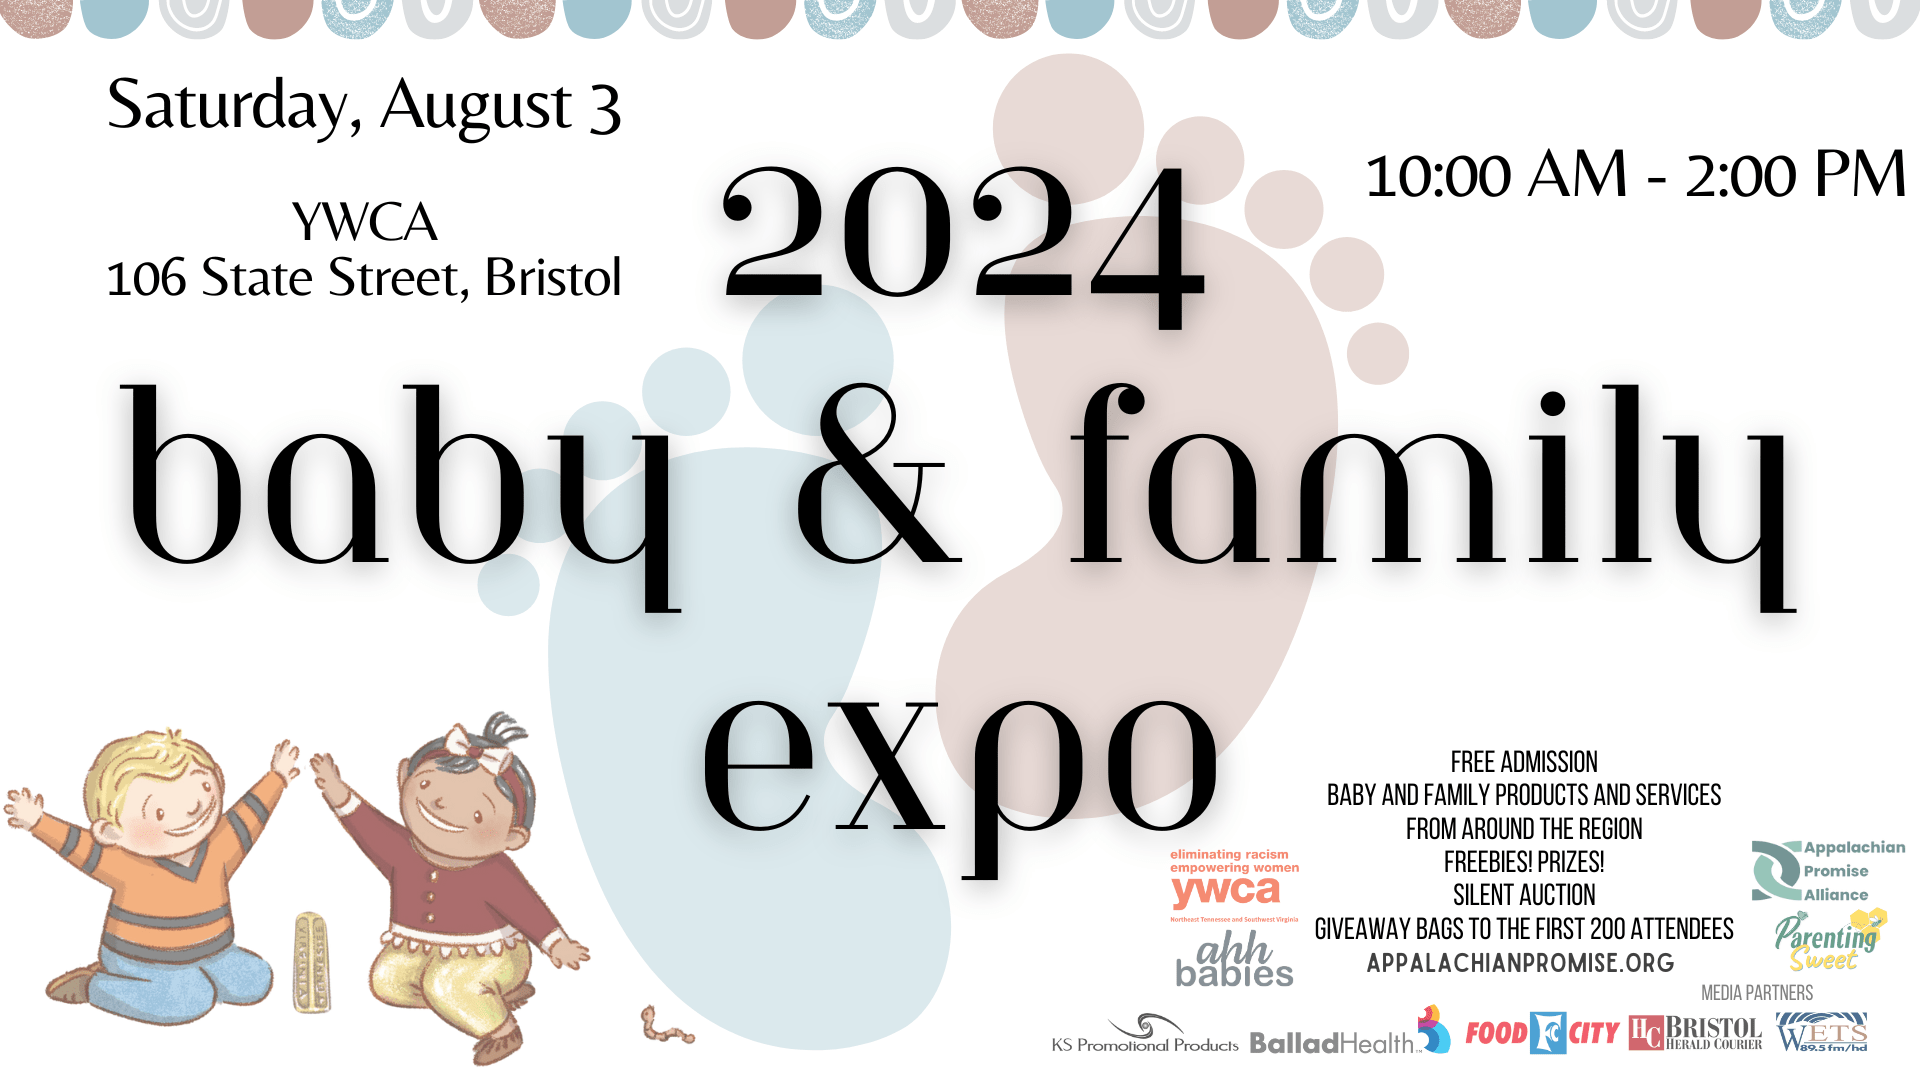 2024 baby & family expo. Saturday August 3. YWCA, 106 State St, Bristol. 10:00 AM - 2:00 PM.